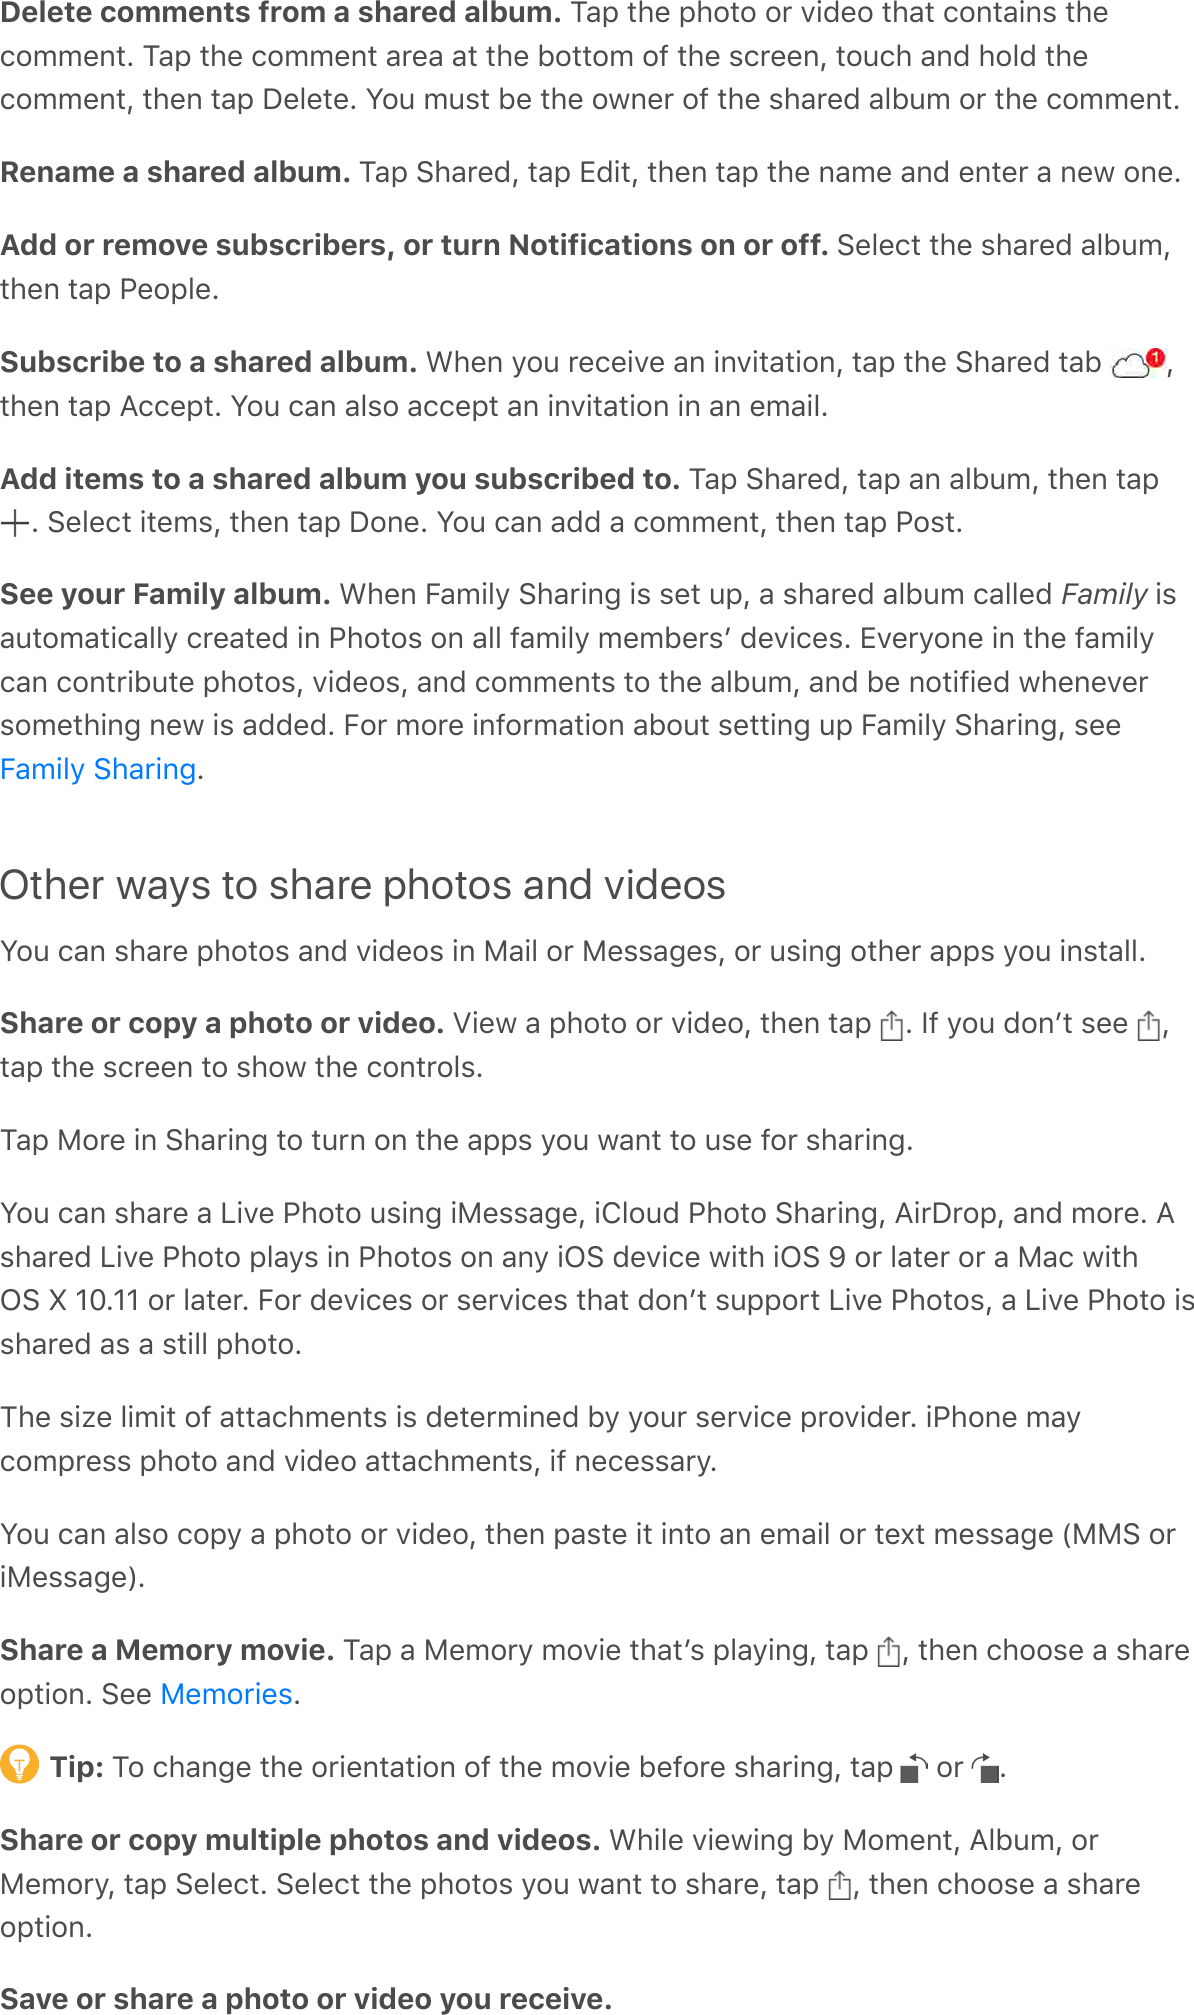 Delete comments from a shared album. ?-;&apos;*#&amp;&apos;;#$*$&apos;$0&apos;A!C&amp;$&apos;*#-*&apos;/$%*-!%,&apos;*#&amp;/$99&amp;%*G&apos;?-;&apos;*#&amp;&apos;/$99&amp;%*&apos;-0&amp;-&apos;-*&apos;*#&amp;&apos;F$**$9&apos;$7&apos;*#&amp;&apos;,/0&amp;&amp;%Q&apos;*$6/#&apos;-%C&apos;#$.C&apos;*#&amp;/$99&amp;%*Q&apos;*#&amp;%&apos;*-;&apos;&lt;&amp;.&amp;*&amp;G&apos;S$6&apos;96,*&apos;F&amp;&apos;*#&amp;&apos;$3%&amp;0&apos;$7&apos;*#&amp;&apos;,#-0&amp;C&apos;-.F69&apos;$0&apos;*#&amp;&apos;/$99&amp;%*GRename a shared album. ?-;&apos;:#-0&amp;CQ&apos;*-;&apos;XC!*Q&apos;*#&amp;%&apos;*-;&apos;*#&amp;&apos;%-9&amp;&apos;-%C&apos;&amp;%*&amp;0&apos;-&apos;%&amp;3&apos;$%&amp;GAdd or remove subscribers, or turn Notifications on or off. :&amp;.&amp;/*&apos;*#&amp;&apos;,#-0&amp;C&apos;-.F69Q*#&amp;%&apos;*-;&apos;&quot;&amp;$;.&amp;GSubscribe to a shared album. L#&amp;%&apos;&gt;$6&apos;0&amp;/&amp;!A&amp;&apos;-%&apos;!%A!*-*!$%Q&apos;*-;&apos;*#&amp;&apos;:#-0&amp;C&apos;*-F&apos; Q*#&amp;%&apos;*-;&apos;B//&amp;;*G&apos;S$6&apos;/-%&apos;-.,$&apos;-//&amp;;*&apos;-%&apos;!%A!*-*!$%&apos;!%&apos;-%&apos;&amp;9-!.GAdd items to a shared album you subscribed to. ?-;&apos;:#-0&amp;CQ&apos;*-;&apos;-%&apos;-.F69Q&apos;*#&amp;%&apos;*-;&apos;G&apos;:&amp;.&amp;/*&apos;!*&amp;9,Q&apos;*#&amp;%&apos;*-;&apos;&lt;$%&amp;G&apos;S$6&apos;/-%&apos;-CC&apos;-&apos;/$99&amp;%*Q&apos;*#&amp;%&apos;*-;&apos;&quot;$,*GSee your Family album. L#&amp;%&apos;5-9!.&gt;&apos;:#-0!%4&apos;!,&apos;,&amp;*&apos;6;Q&apos;-&apos;,#-0&amp;C&apos;-.F69&apos;/-..&amp;C&apos;Family&apos;!,-6*$9-*!/-..&gt;&apos;/0&amp;-*&amp;C&apos;!%&apos;&quot;#$*$,&apos;$%&apos;-..&apos;7-9!.&gt;&apos;9&amp;9F&amp;0,+&apos;C&amp;A!/&amp;,G&apos;XA&amp;0&gt;$%&amp;&apos;!%&apos;*#&amp;&apos;7-9!.&gt;/-%&apos;/$%*0!F6*&amp;&apos;;#$*$,Q&apos;A!C&amp;$,Q&apos;-%C&apos;/$99&amp;%*,&apos;*$&apos;*#&amp;&apos;-.F69Q&apos;-%C&apos;F&amp;&apos;%$*!7!&amp;C&apos;3#&amp;%&amp;A&amp;0,$9&amp;*#!%4&apos;%&amp;3&apos;!,&apos;-CC&amp;CG&apos;5$0&apos;9$0&amp;&apos;!%7$09-*!$%&apos;-F$6*&apos;,&amp;**!%4&apos;6;&apos;5-9!.&gt;&apos;:#-0!%4Q&apos;,&amp;&amp;GOther ways to share photos and videosS$6&apos;/-%&apos;,#-0&amp;&apos;;#$*$,&apos;-%C&apos;A!C&amp;$,&apos;!%&apos;H-!.&apos;$0&apos;H&amp;,,-4&amp;,Q&apos;$0&apos;6,!%4&apos;$*#&amp;0&apos;-;;,&apos;&gt;$6&apos;!%,*-..GShare or copy a photo or video. Z!&amp;3&apos;-&apos;;#$*$&apos;$0&apos;A!C&amp;$Q&apos;*#&amp;%&apos;*-;&apos; G&apos;)7&apos;&gt;$6&apos;C$%+*&apos;,&amp;&amp;&apos; Q*-;&apos;*#&amp;&apos;,/0&amp;&amp;%&apos;*$&apos;,#$3&apos;*#&amp;&apos;/$%*0$.,G?-;&apos;H$0&amp;&apos;!%&apos;:#-0!%4&apos;*$&apos;*60%&apos;$%&apos;*#&amp;&apos;-;;,&apos;&gt;$6&apos;3-%*&apos;*$&apos;6,&amp;&apos;7$0&apos;,#-0!%4GS$6&apos;/-%&apos;,#-0&amp;&apos;-&apos;D!A&amp;&apos;&quot;#$*$&apos;6,!%4&apos;!H&amp;,,-4&amp;Q&apos;!T.$6C&apos;&quot;#$*$&apos;:#-0!%4Q&apos;B!0&lt;0$;Q&apos;-%C&apos;9$0&amp;G&apos;B,#-0&amp;C&apos;D!A&amp;&apos;&quot;#$*$&apos;;.-&gt;,&apos;!%&apos;&quot;#$*$,&apos;$%&apos;-%&gt;&apos;!N:&apos;C&amp;A!/&amp;&apos;3!*#&apos;!N:&apos;p&apos;$0&apos;.-*&amp;0&apos;$0&apos;-&apos;H-/&apos;3!*#N:&apos;(&apos;OoGOO&apos;$0&apos;.-*&amp;0G&apos;5$0&apos;C&amp;A!/&amp;,&apos;$0&apos;,&amp;0A!/&amp;,&apos;*#-*&apos;C$%+*&apos;,6;;$0*&apos;D!A&amp;&apos;&quot;#$*$,Q&apos;-&apos;D!A&amp;&apos;&quot;#$*$&apos;!,,#-0&amp;C&apos;-,&apos;-&apos;,*!..&apos;;#$*$G?#&amp;&apos;,!@&amp;&apos;.!9!*&apos;$7&apos;-**-/#9&amp;%*,&apos;!,&apos;C&amp;*&amp;09!%&amp;C&apos;F&gt;&apos;&gt;$60&apos;,&amp;0A!/&amp;&apos;;0$A!C&amp;0G&apos;!&quot;#$%&amp;&apos;9-&gt;/$9;0&amp;,,&apos;;#$*$&apos;-%C&apos;A!C&amp;$&apos;-**-/#9&amp;%*,Q&apos;!7&apos;%&amp;/&amp;,,-0&gt;GS$6&apos;/-%&apos;-.,$&apos;/$;&gt;&apos;-&apos;;#$*$&apos;$0&apos;A!C&amp;$Q&apos;*#&amp;%&apos;;-,*&amp;&apos;!*&apos;!%*$&apos;-%&apos;&amp;9-!.&apos;$0&apos;*&amp;^*&apos;9&amp;,,-4&amp;&apos;\HH:&apos;$0!H&amp;,,-4&amp;]GShare a Memory movie. ?-;&apos;-&apos;H&amp;9$0&gt;&apos;9$A!&amp;&apos;*#-*+,&apos;;.-&gt;!%4Q&apos;*-;&apos; Q&apos;*#&amp;%&apos;/#$$,&amp;&apos;-&apos;,#-0&amp;$;*!$%G&apos;:&amp;&amp;&apos; GTip: ?$&apos;/#-%4&amp;&apos;*#&amp;&apos;$0!&amp;%*-*!$%&apos;$7&apos;*#&amp;&apos;9$A!&amp;&apos;F&amp;7$0&amp;&apos;,#-0!%4Q&apos;*-;&apos; &apos;$0&apos; GShare or copy multiple photos and videos. L#!.&amp;&apos;A!&amp;3!%4&apos;F&gt;&apos;H$9&amp;%*Q&apos;B.F69Q&apos;$0H&amp;9$0&gt;Q&apos;*-;&apos;:&amp;.&amp;/*G&apos;:&amp;.&amp;/*&apos;*#&amp;&apos;;#$*$,&apos;&gt;$6&apos;3-%*&apos;*$&apos;,#-0&amp;Q&apos;*-;&apos; Q&apos;*#&amp;%&apos;/#$$,&amp;&apos;-&apos;,#-0&amp;$;*!$%GSave or share a photo or video you receive.5-9!.&gt;&apos;:#-0!%4H&amp;9$0!&amp;,